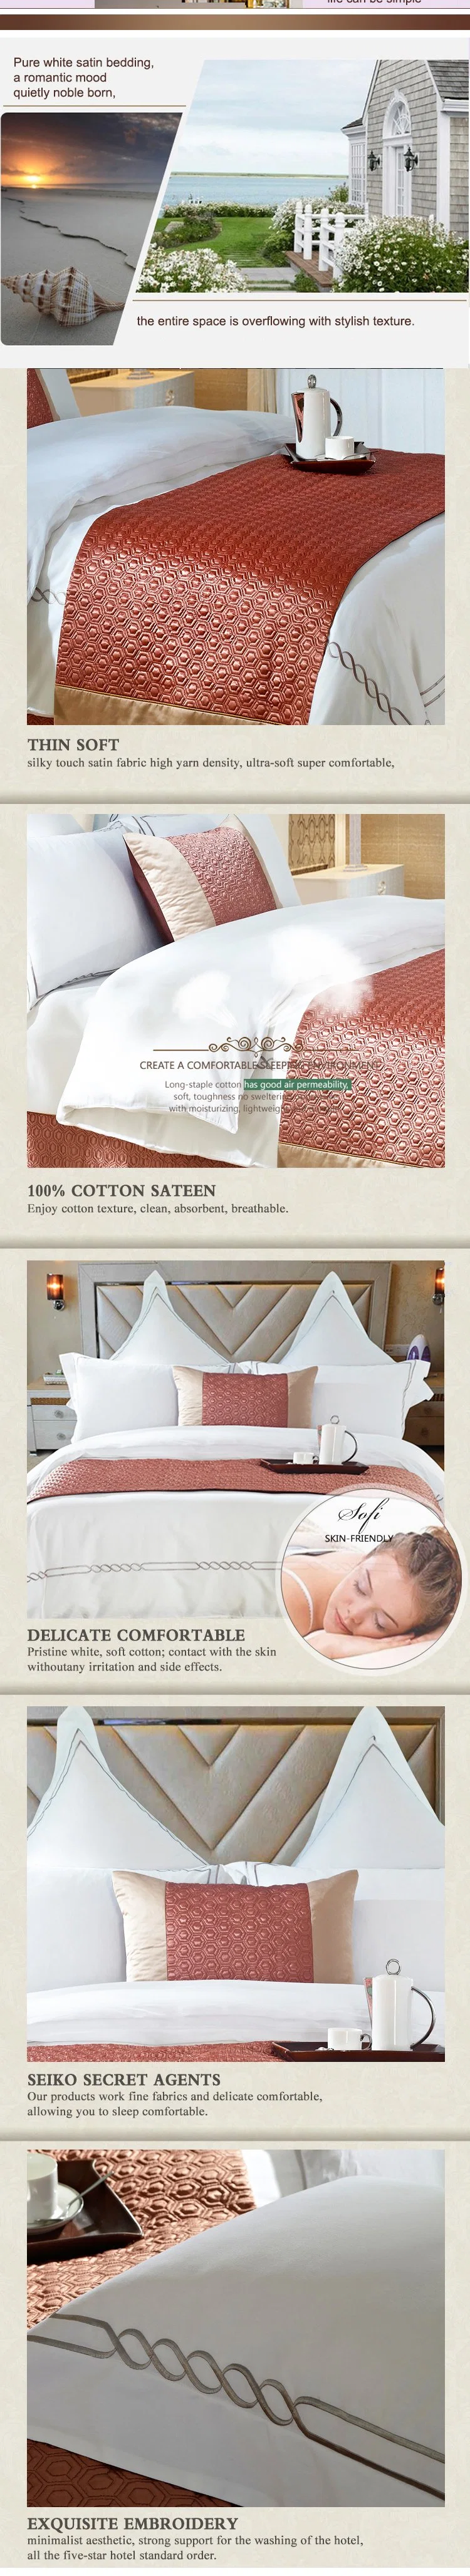 Yrf Soft Luxury Egyptian Cotton Hotel Bed Linen Queen Bedding Sets